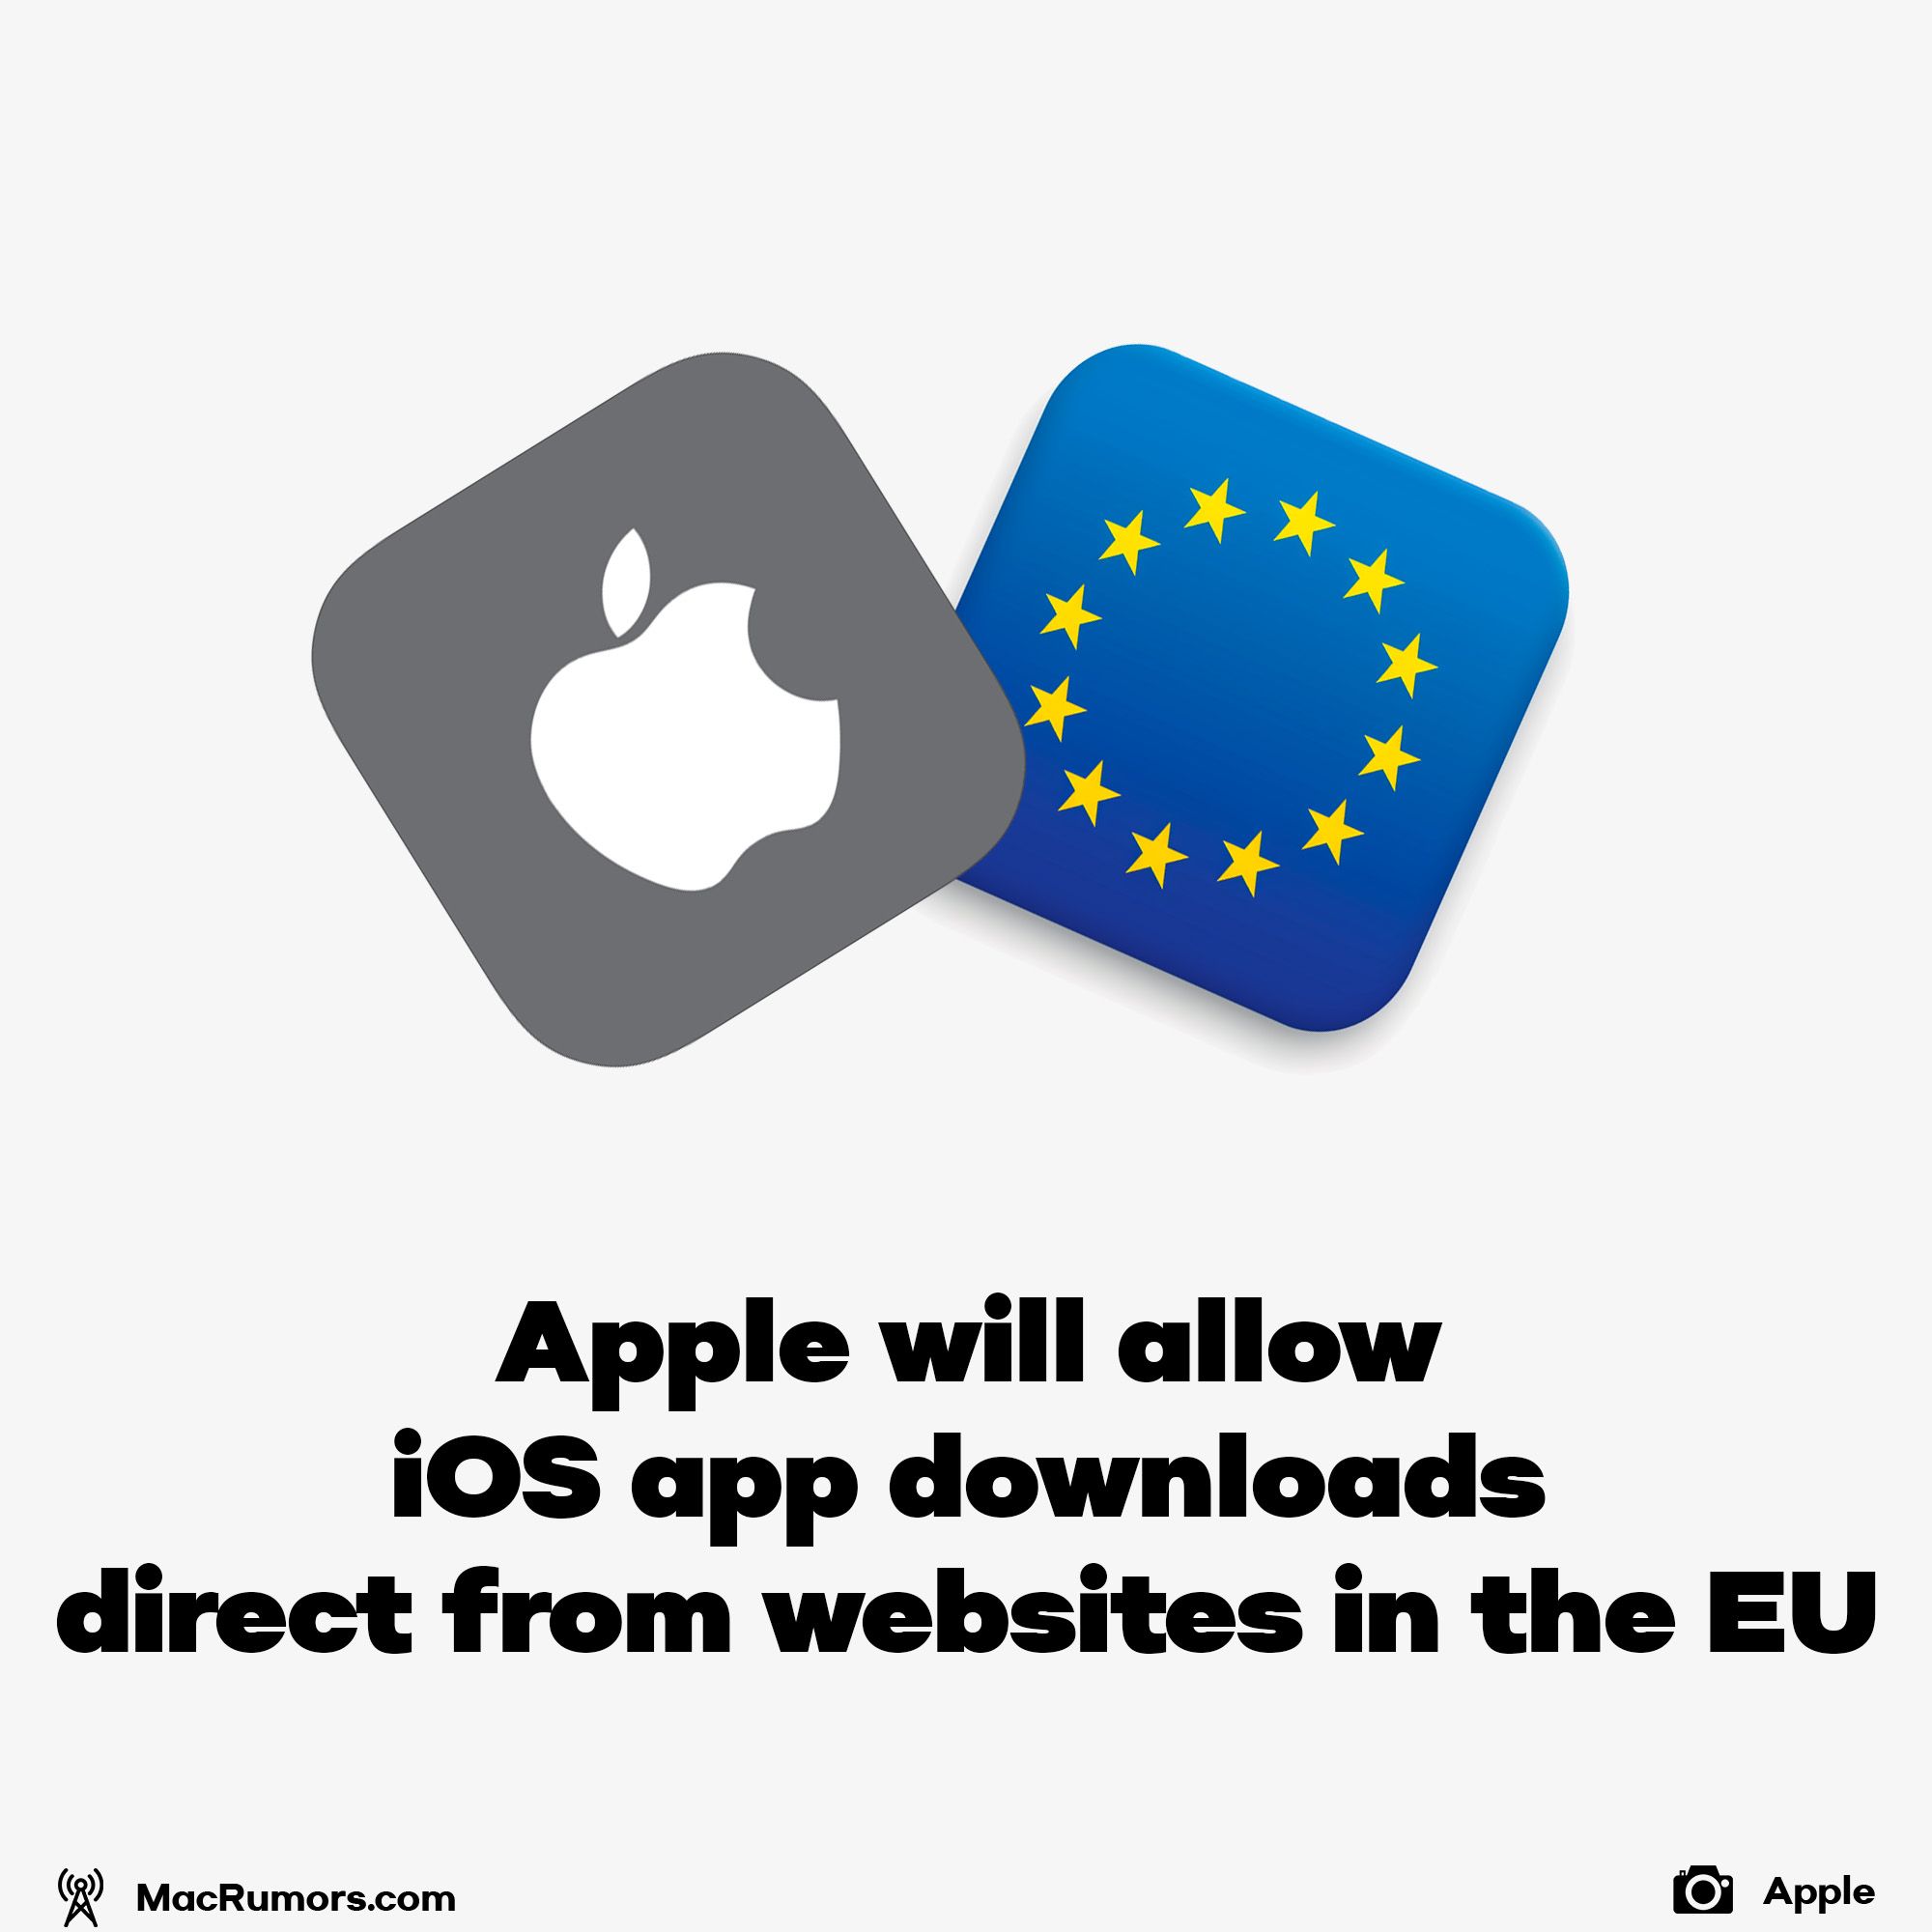 Apple enabled iOS app download from websites in the EU